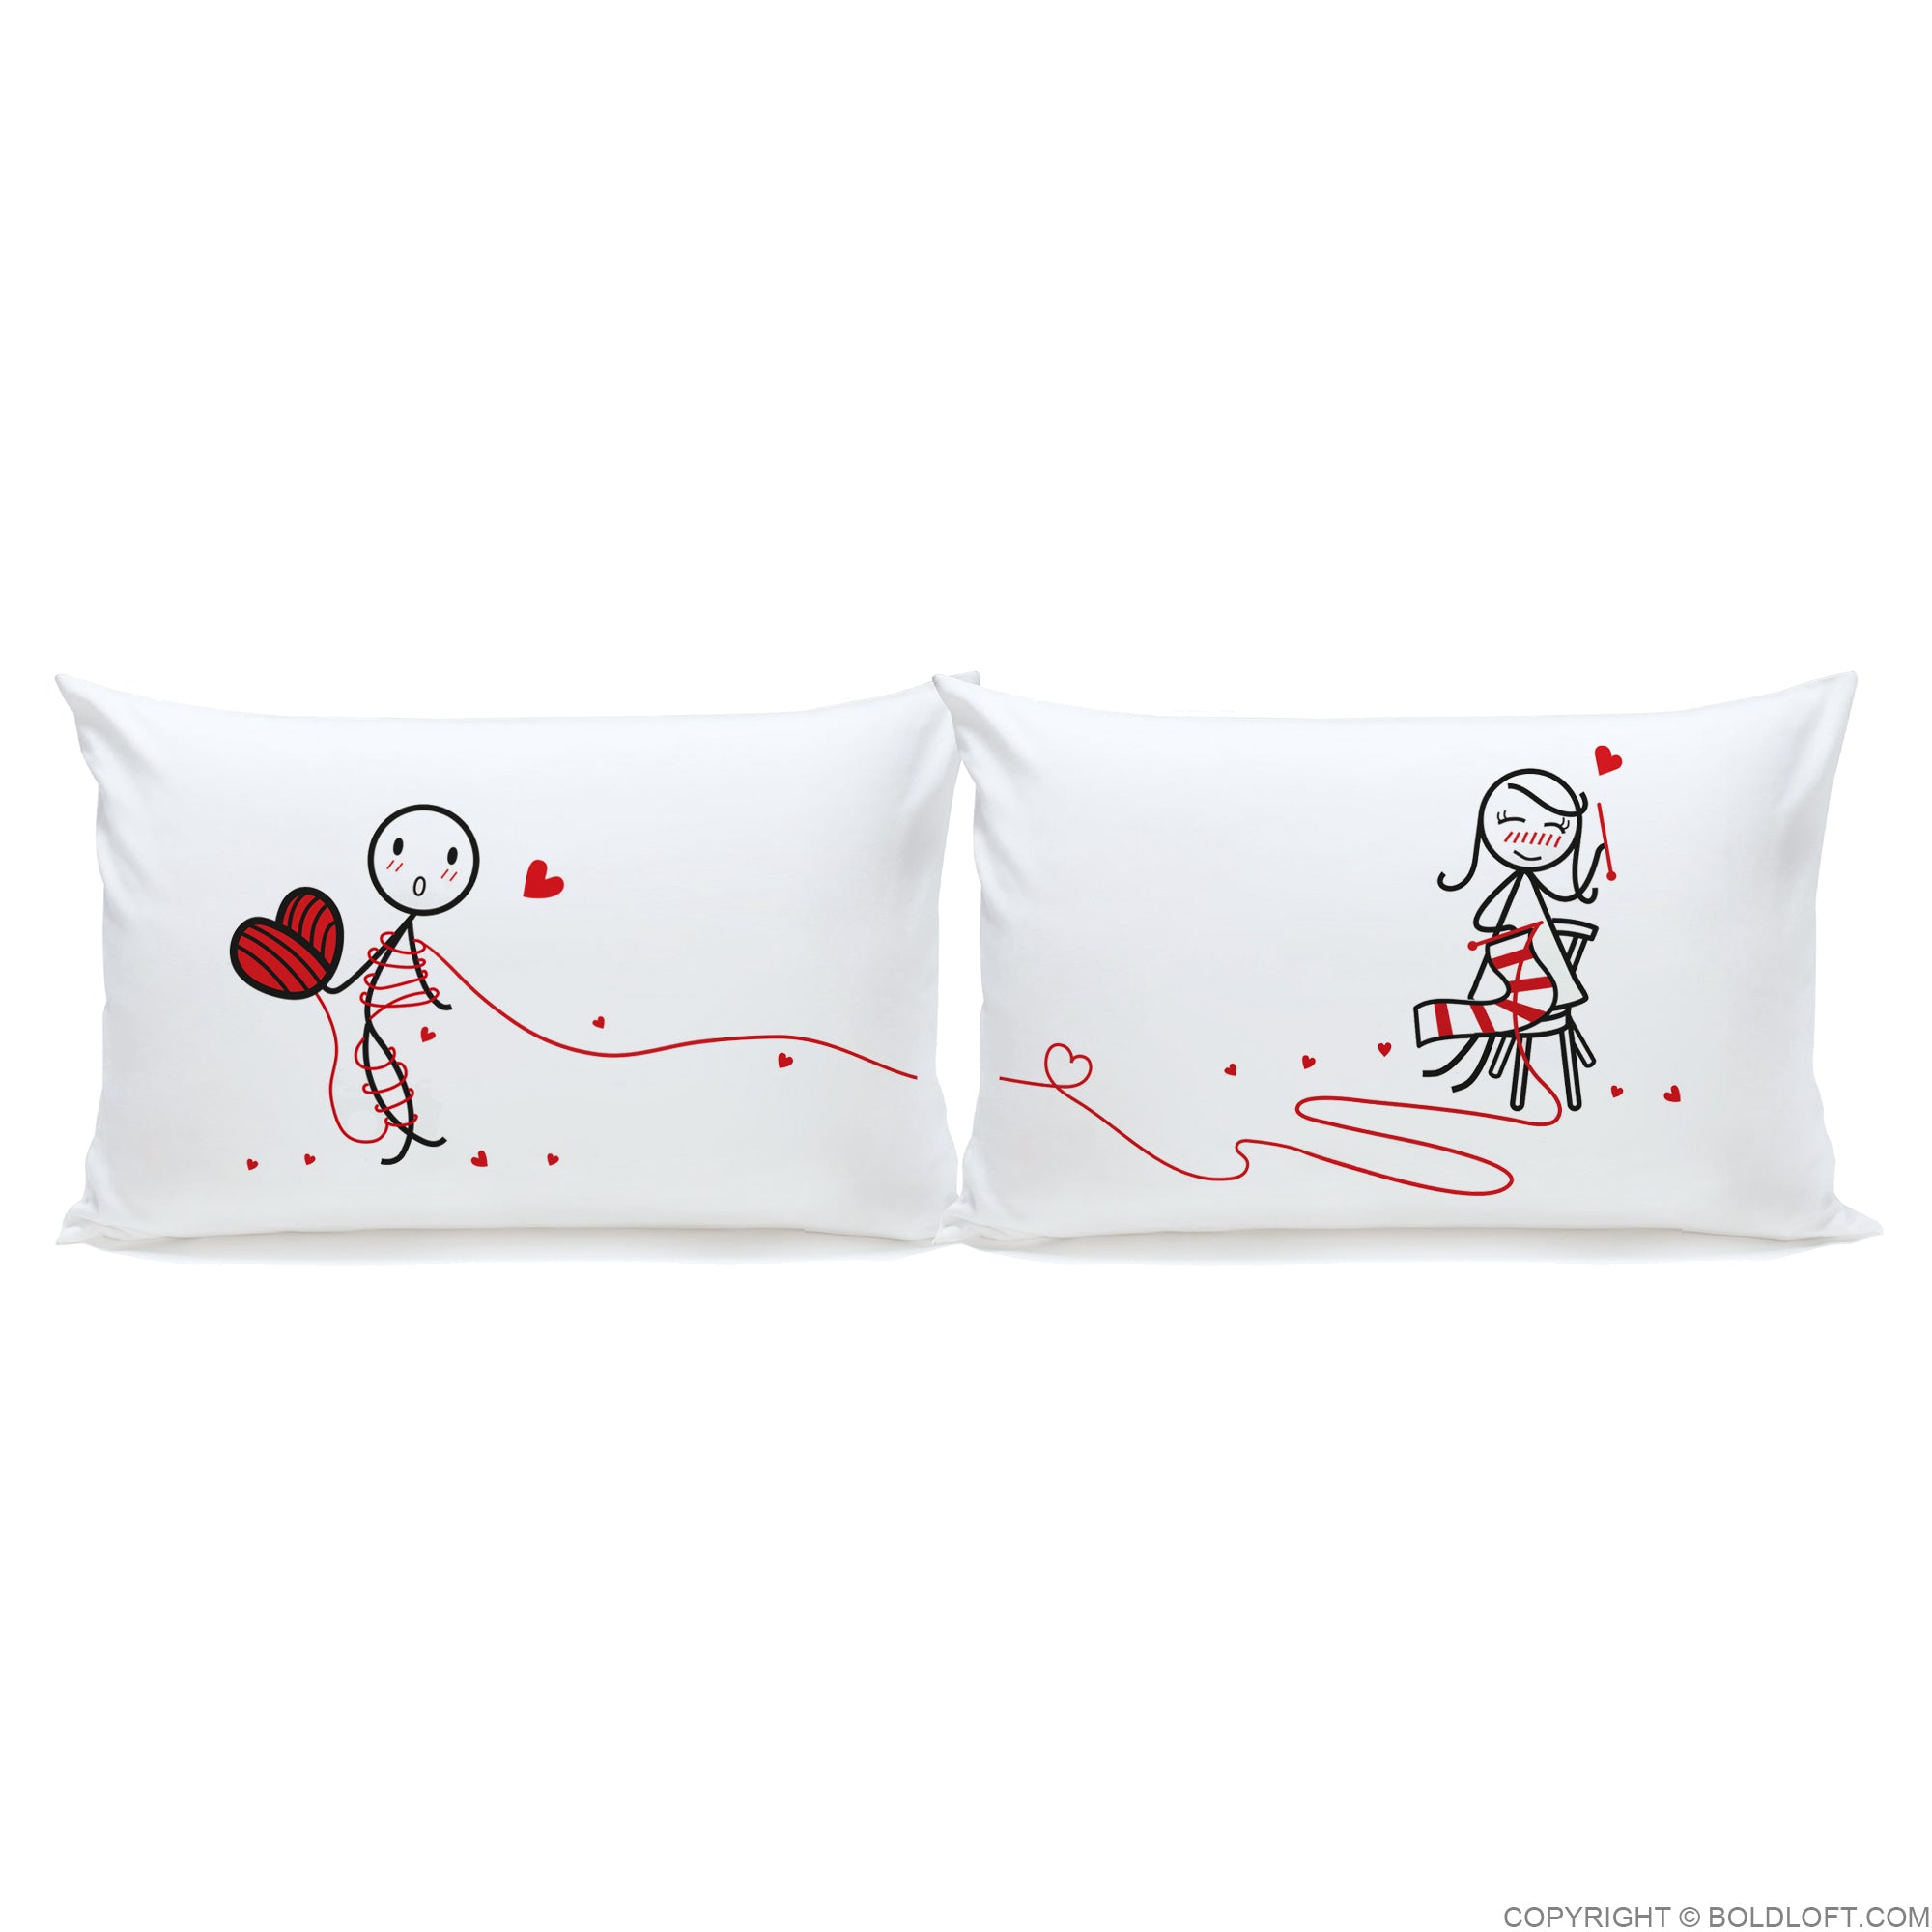 Love Ties Us Together™ Couple Pillowcase Set